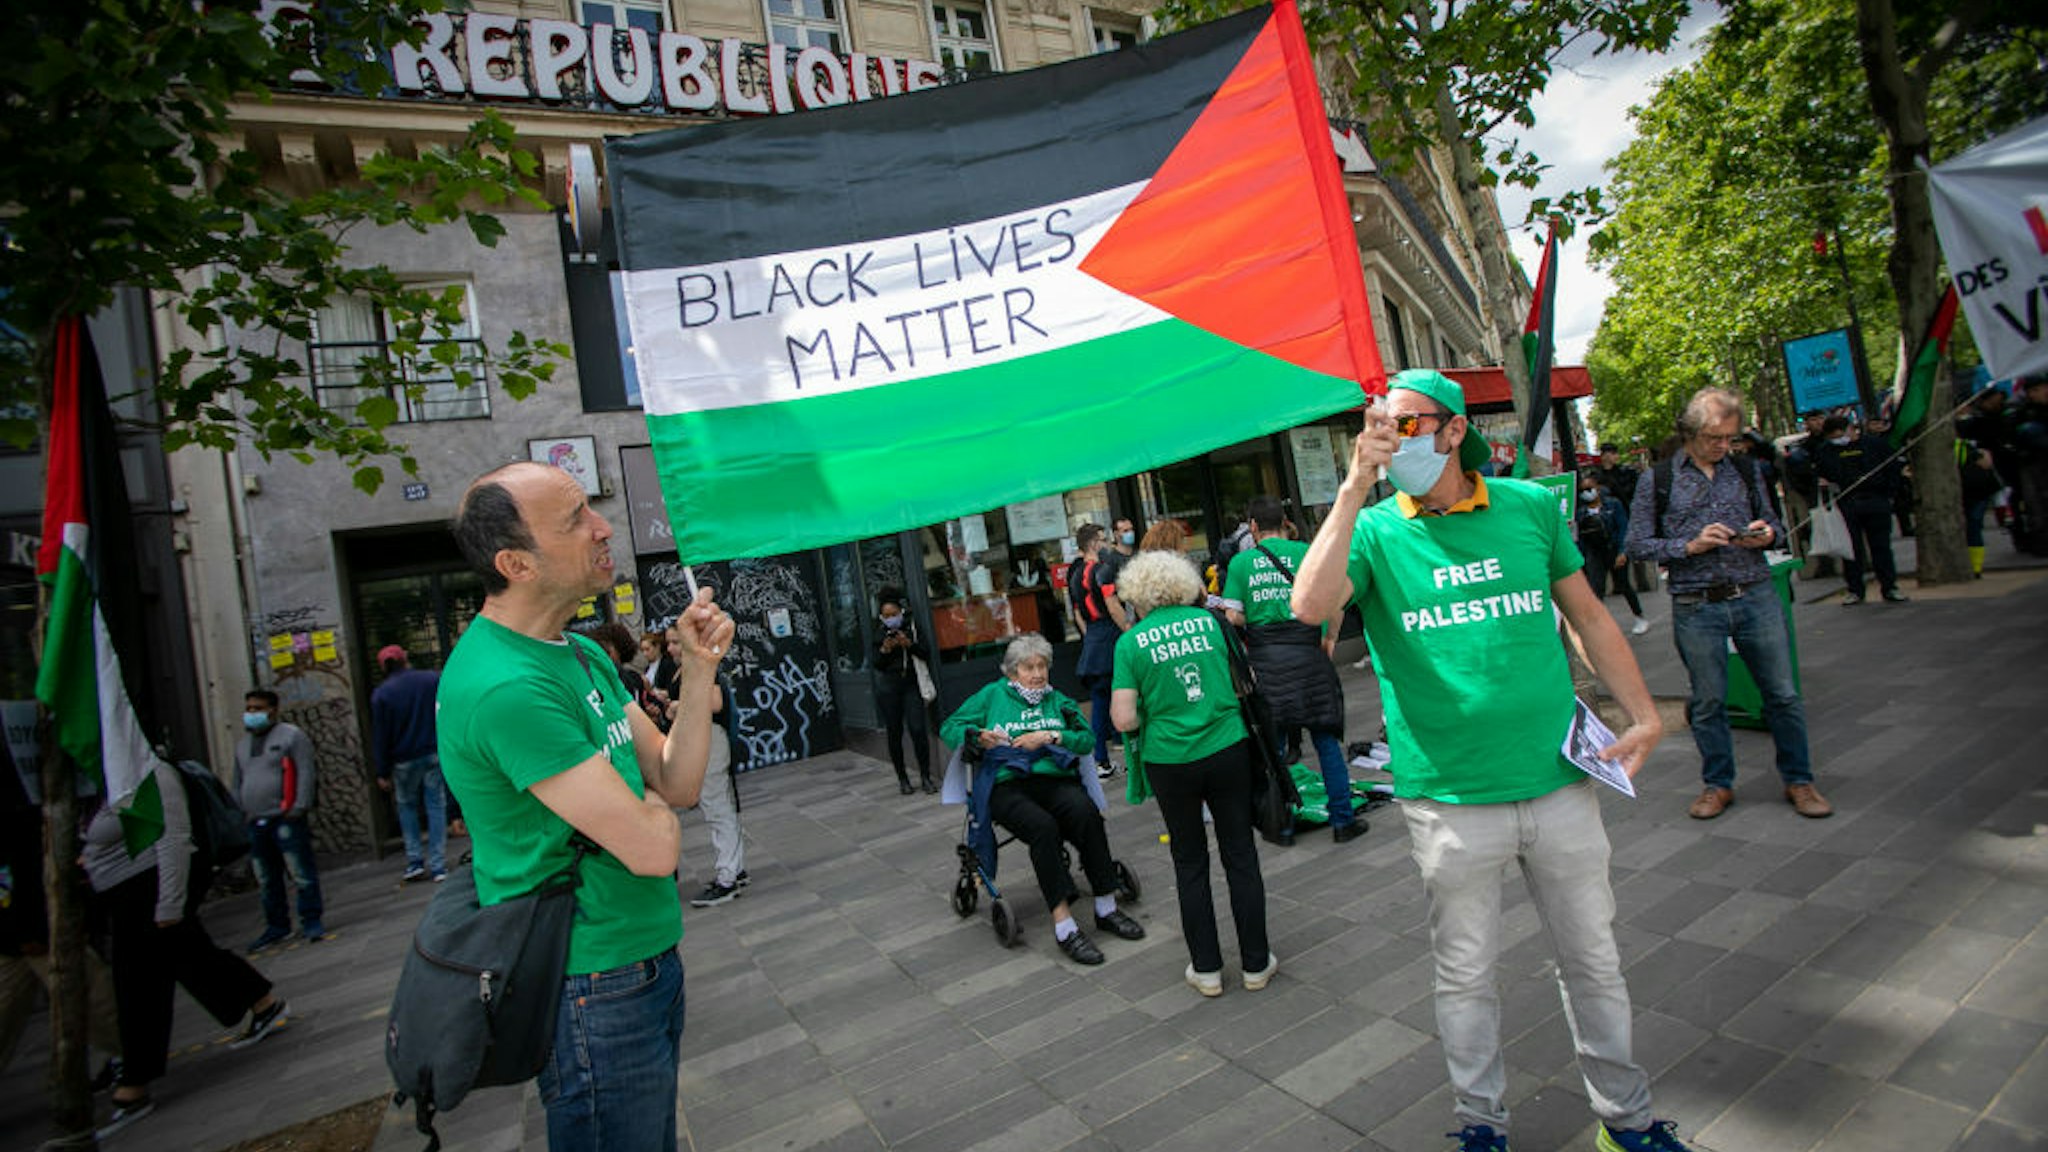 PARIS, FRANCE - JUNE 13: A banner on the palestinian flag is carried during a rally as part of the 'Black Lives Matter' worldwide protests against racism and police brutality on Place de la Republique on June 13, 2020 in Paris, France. People gathered in support of Adama Traore, a Malian French man who died in 2016 after being restrained by police in Paris. (Photo by Marc Piasecki/Getty Images)